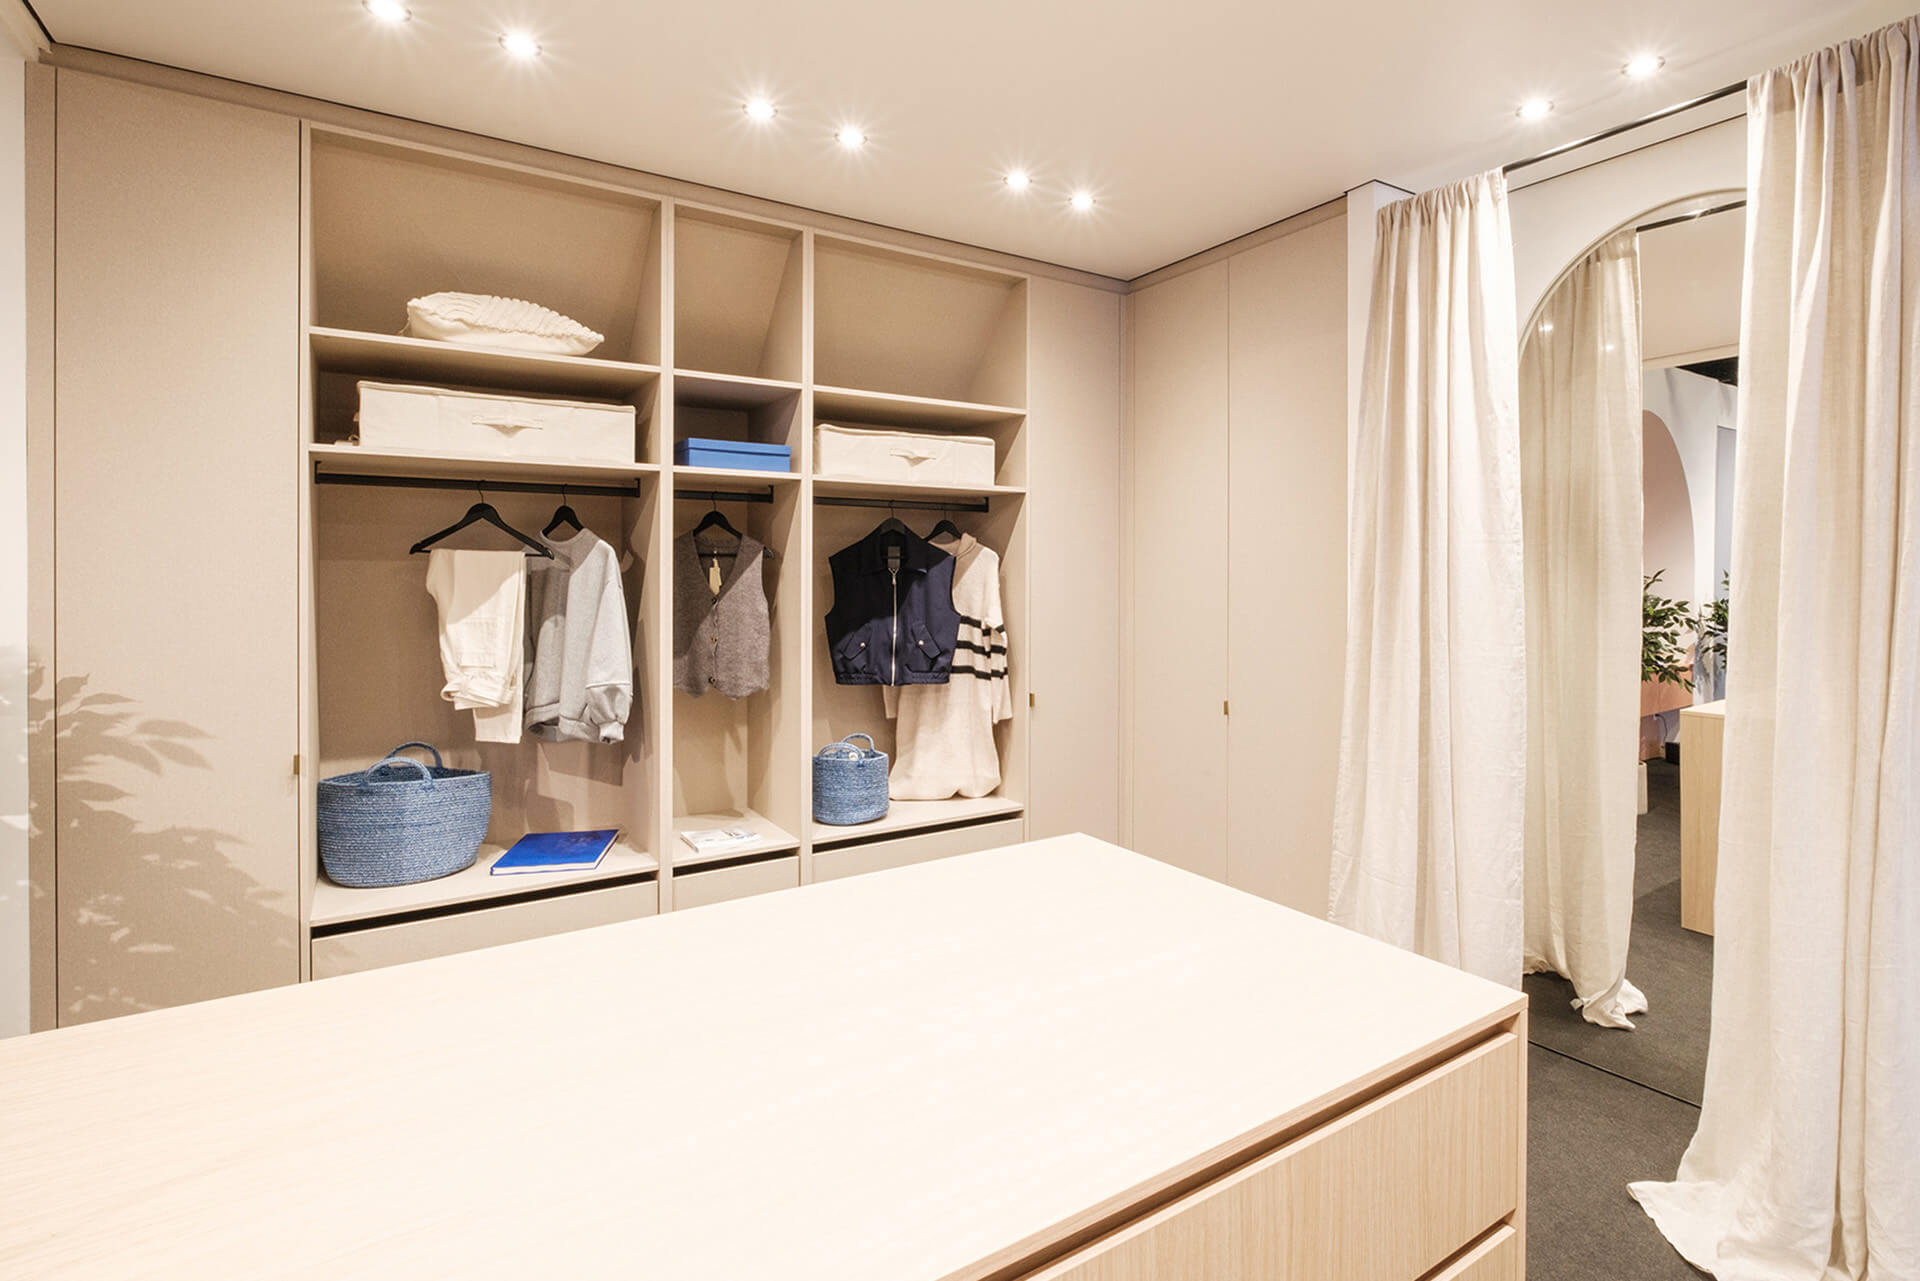 Made-to-measure wardrobes from Maatkasten Online, presented at the BIS exhibition stand